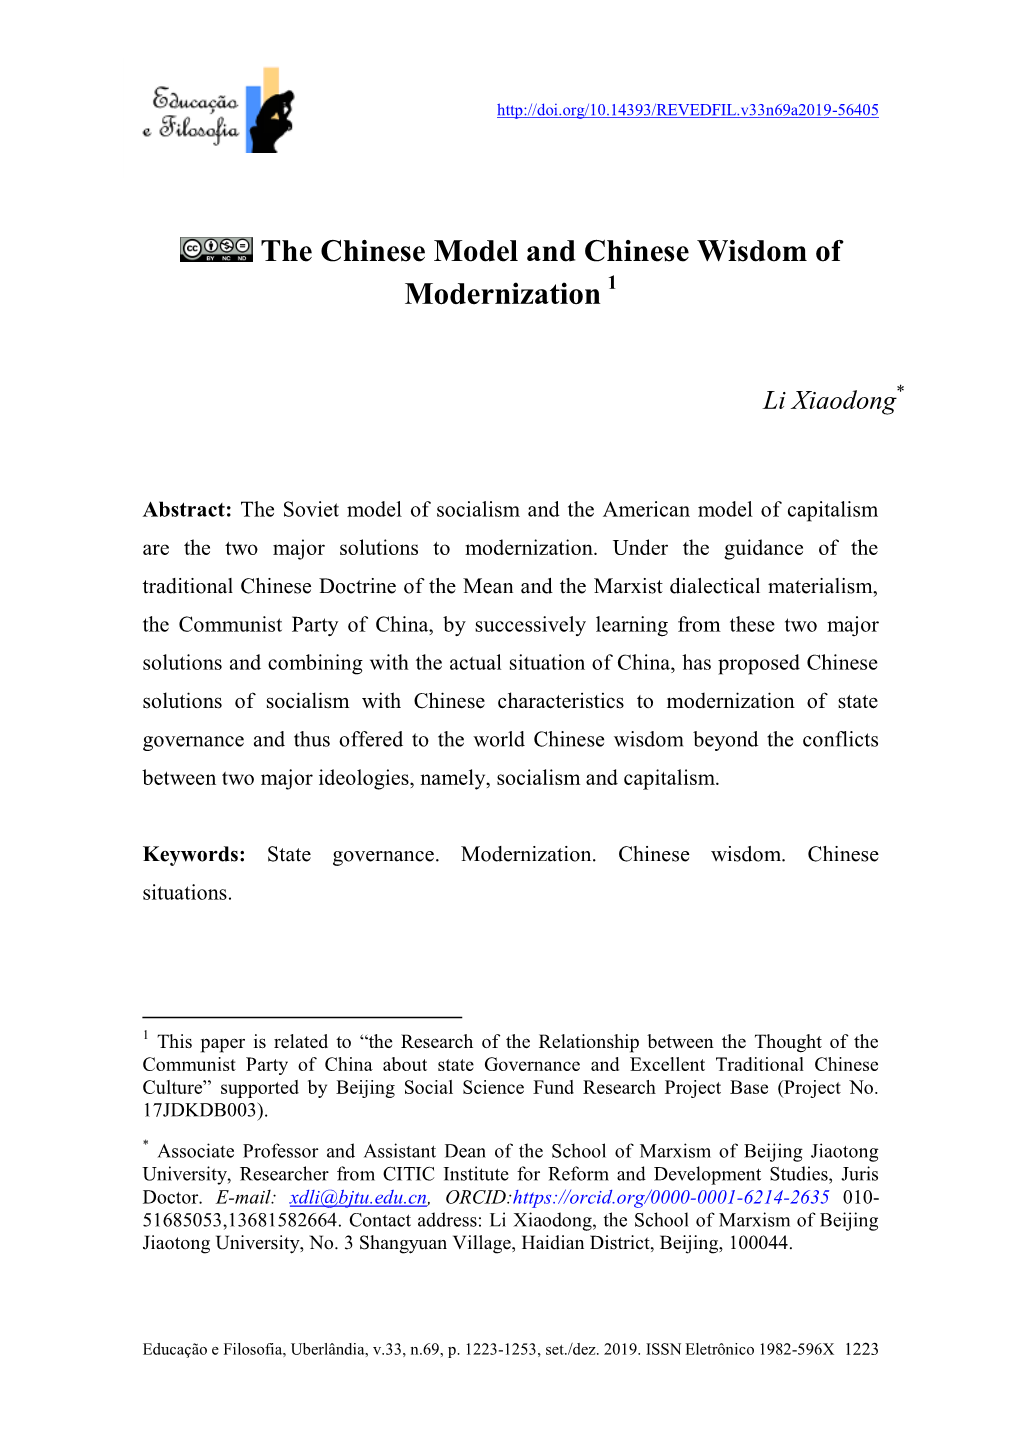 The Chinese Model and Chinese Wisdom of Modernization 1